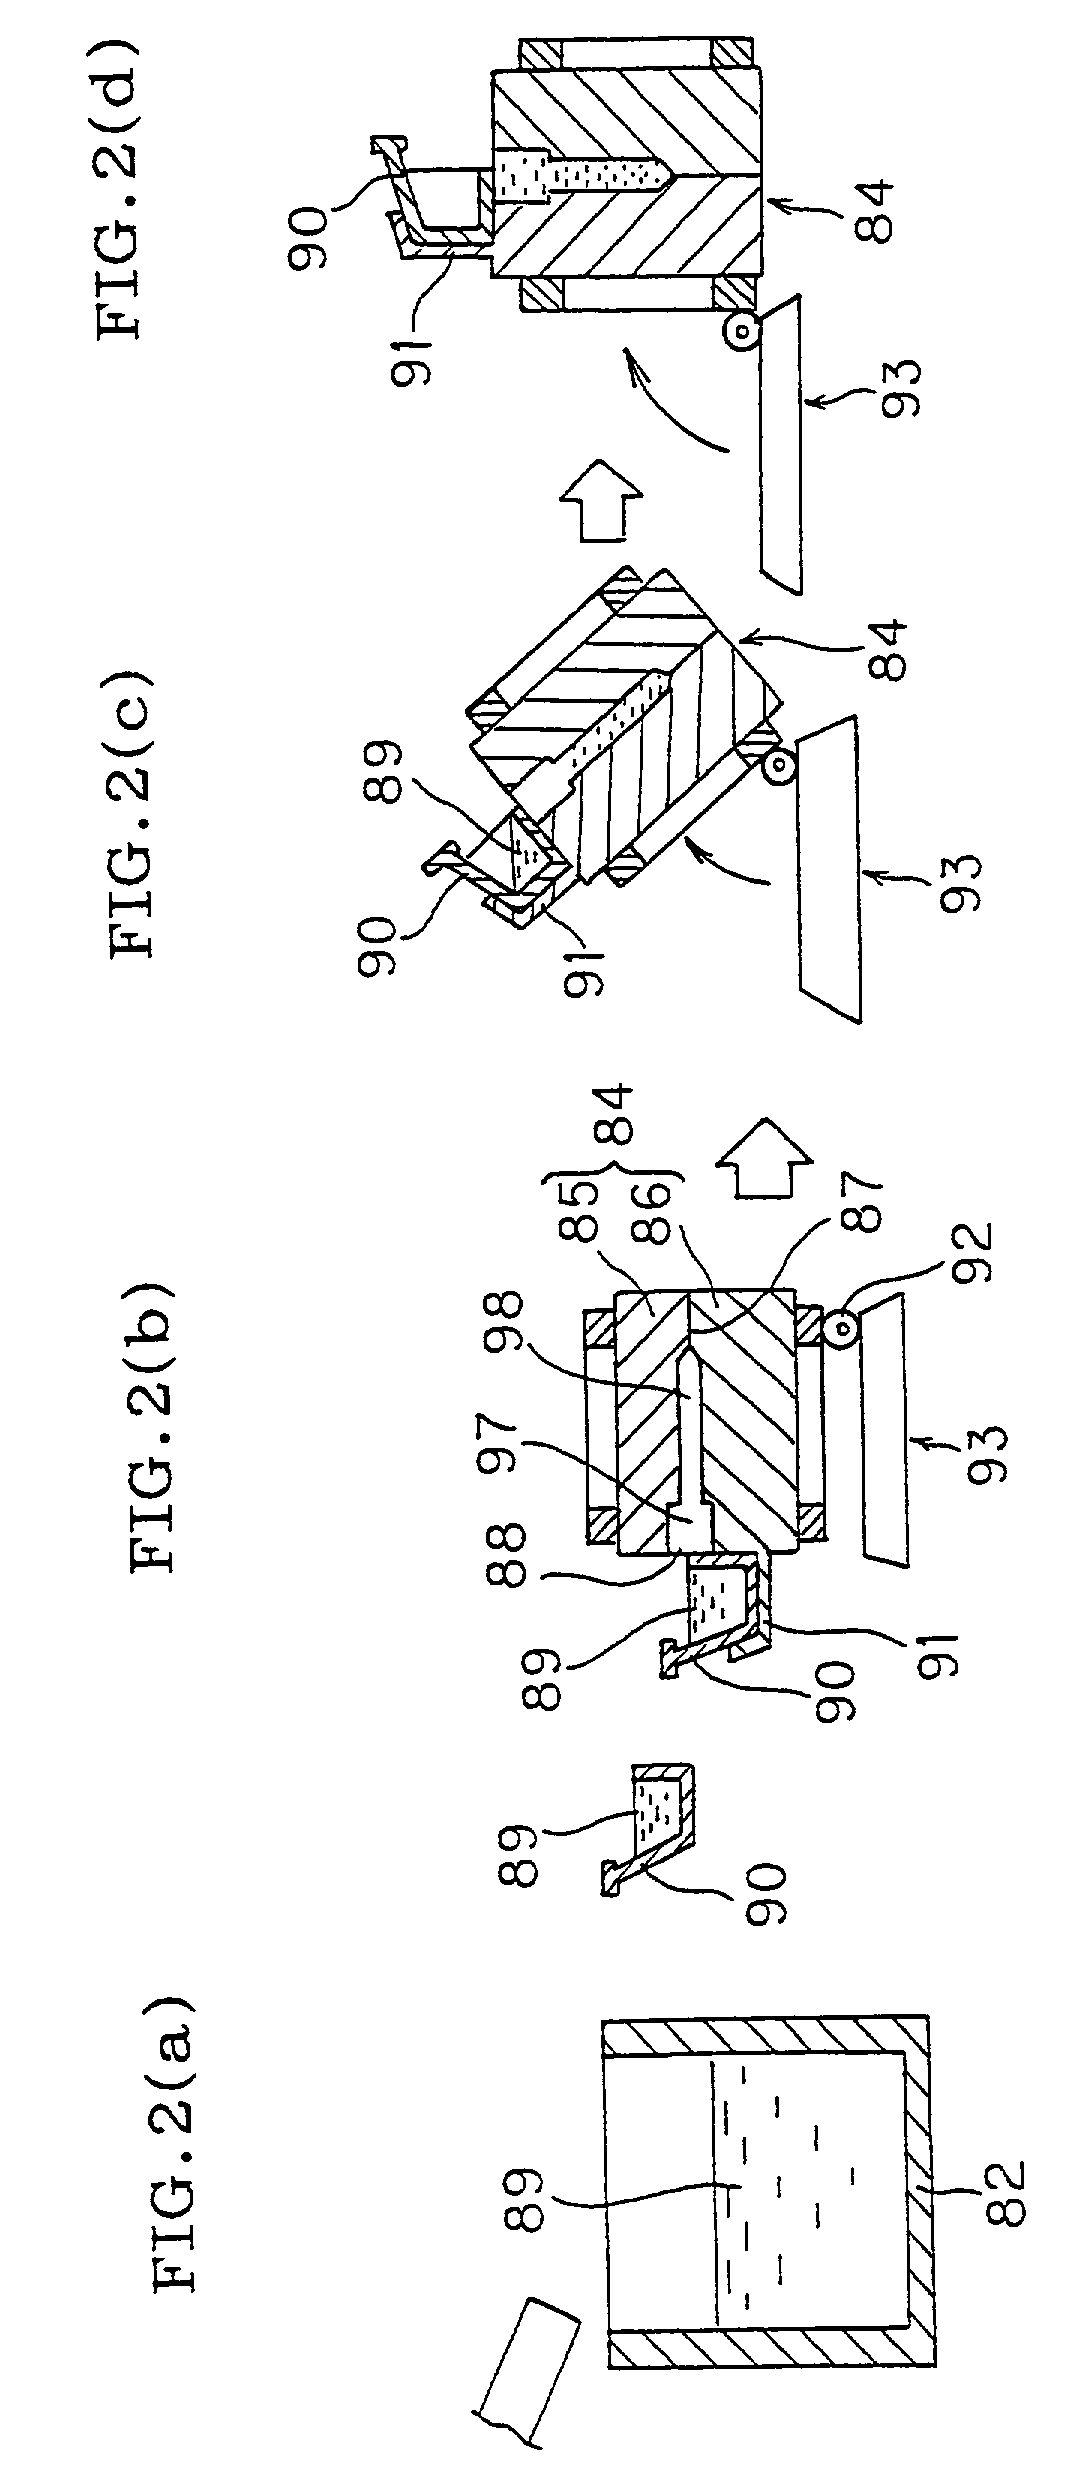 Mold for casting forged material, and method for casting forged material